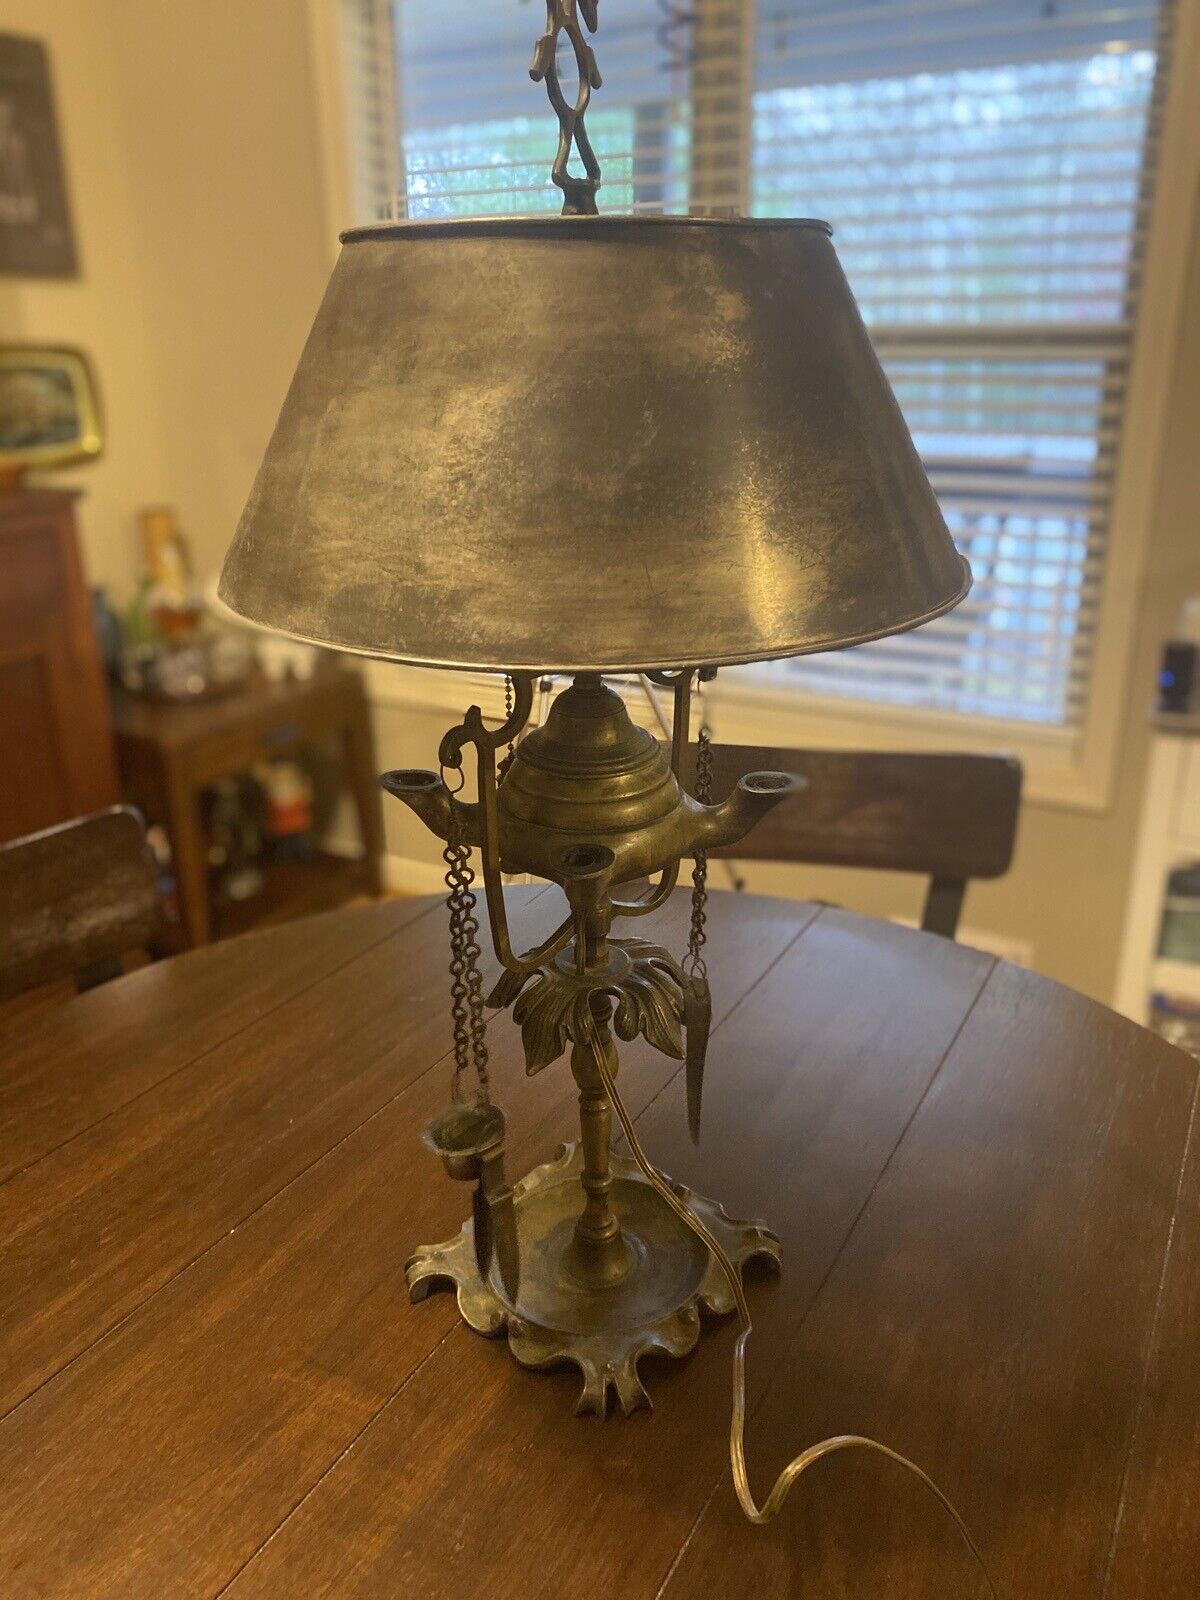 ANTIQUE BRASS LUCERNE WHALE OIL LAMP 4 BURNER w/TOOLS CONVERTED TO ELECTRIC